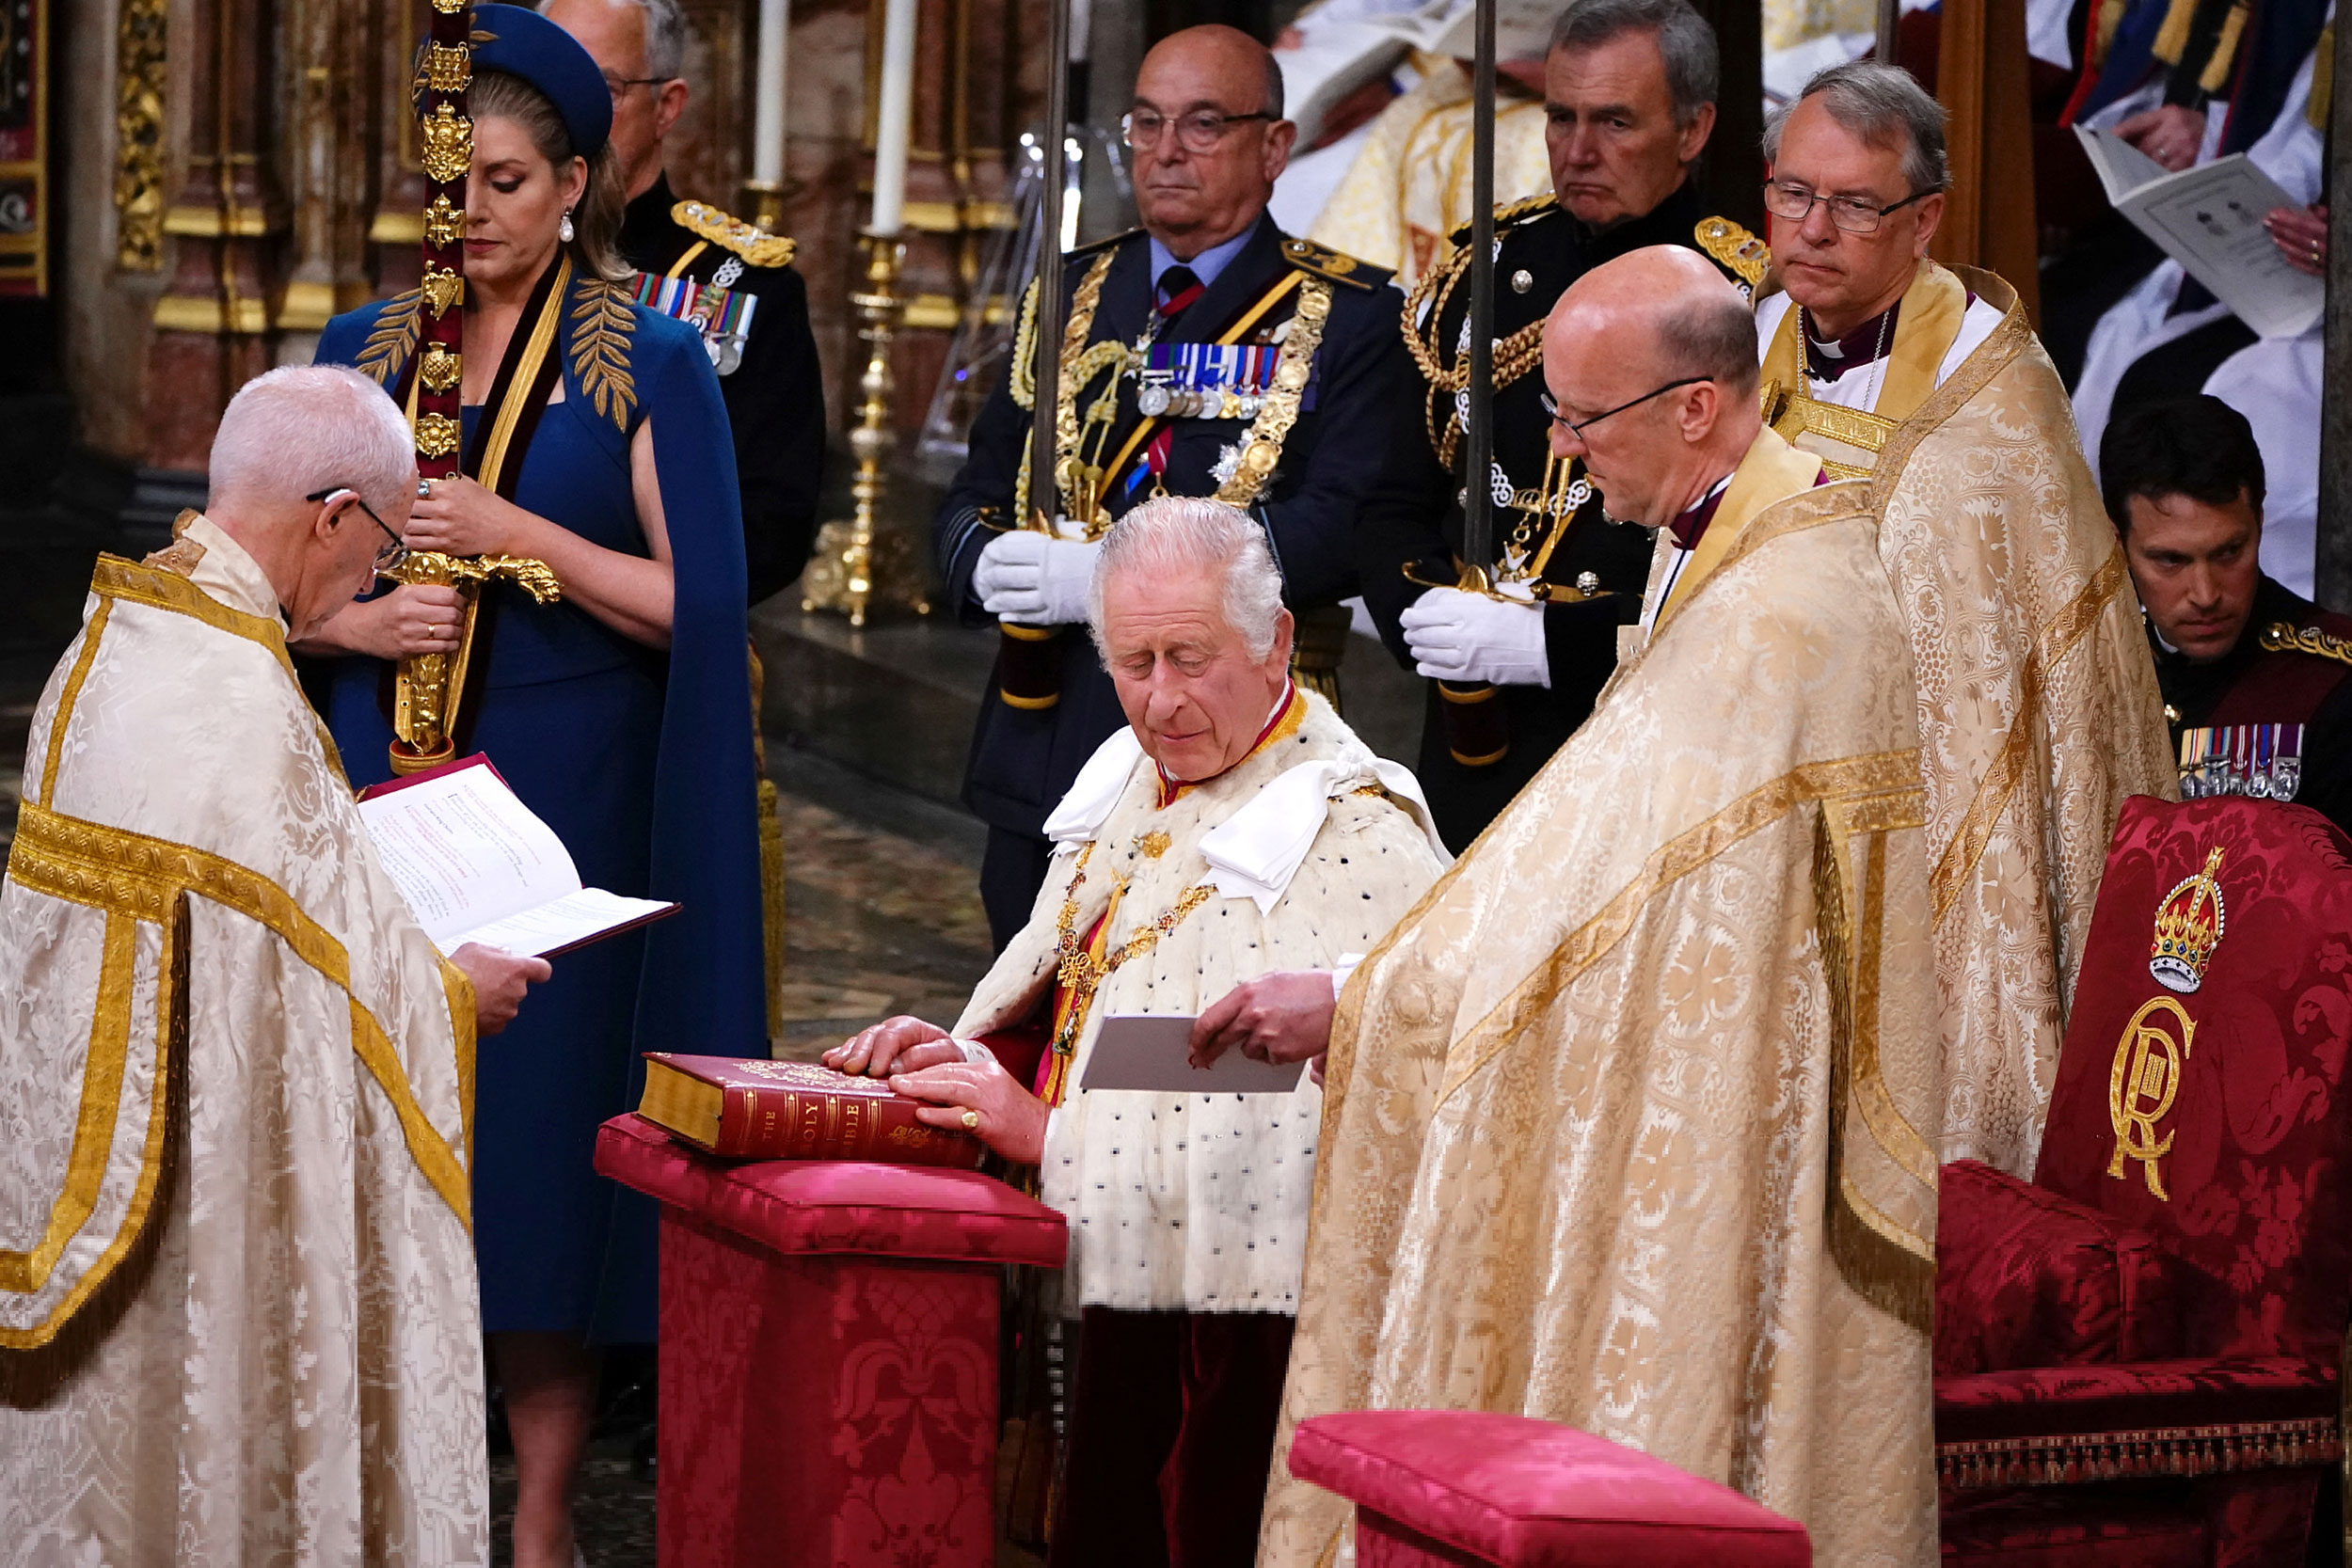 King Charles III during his coronation ceremony.